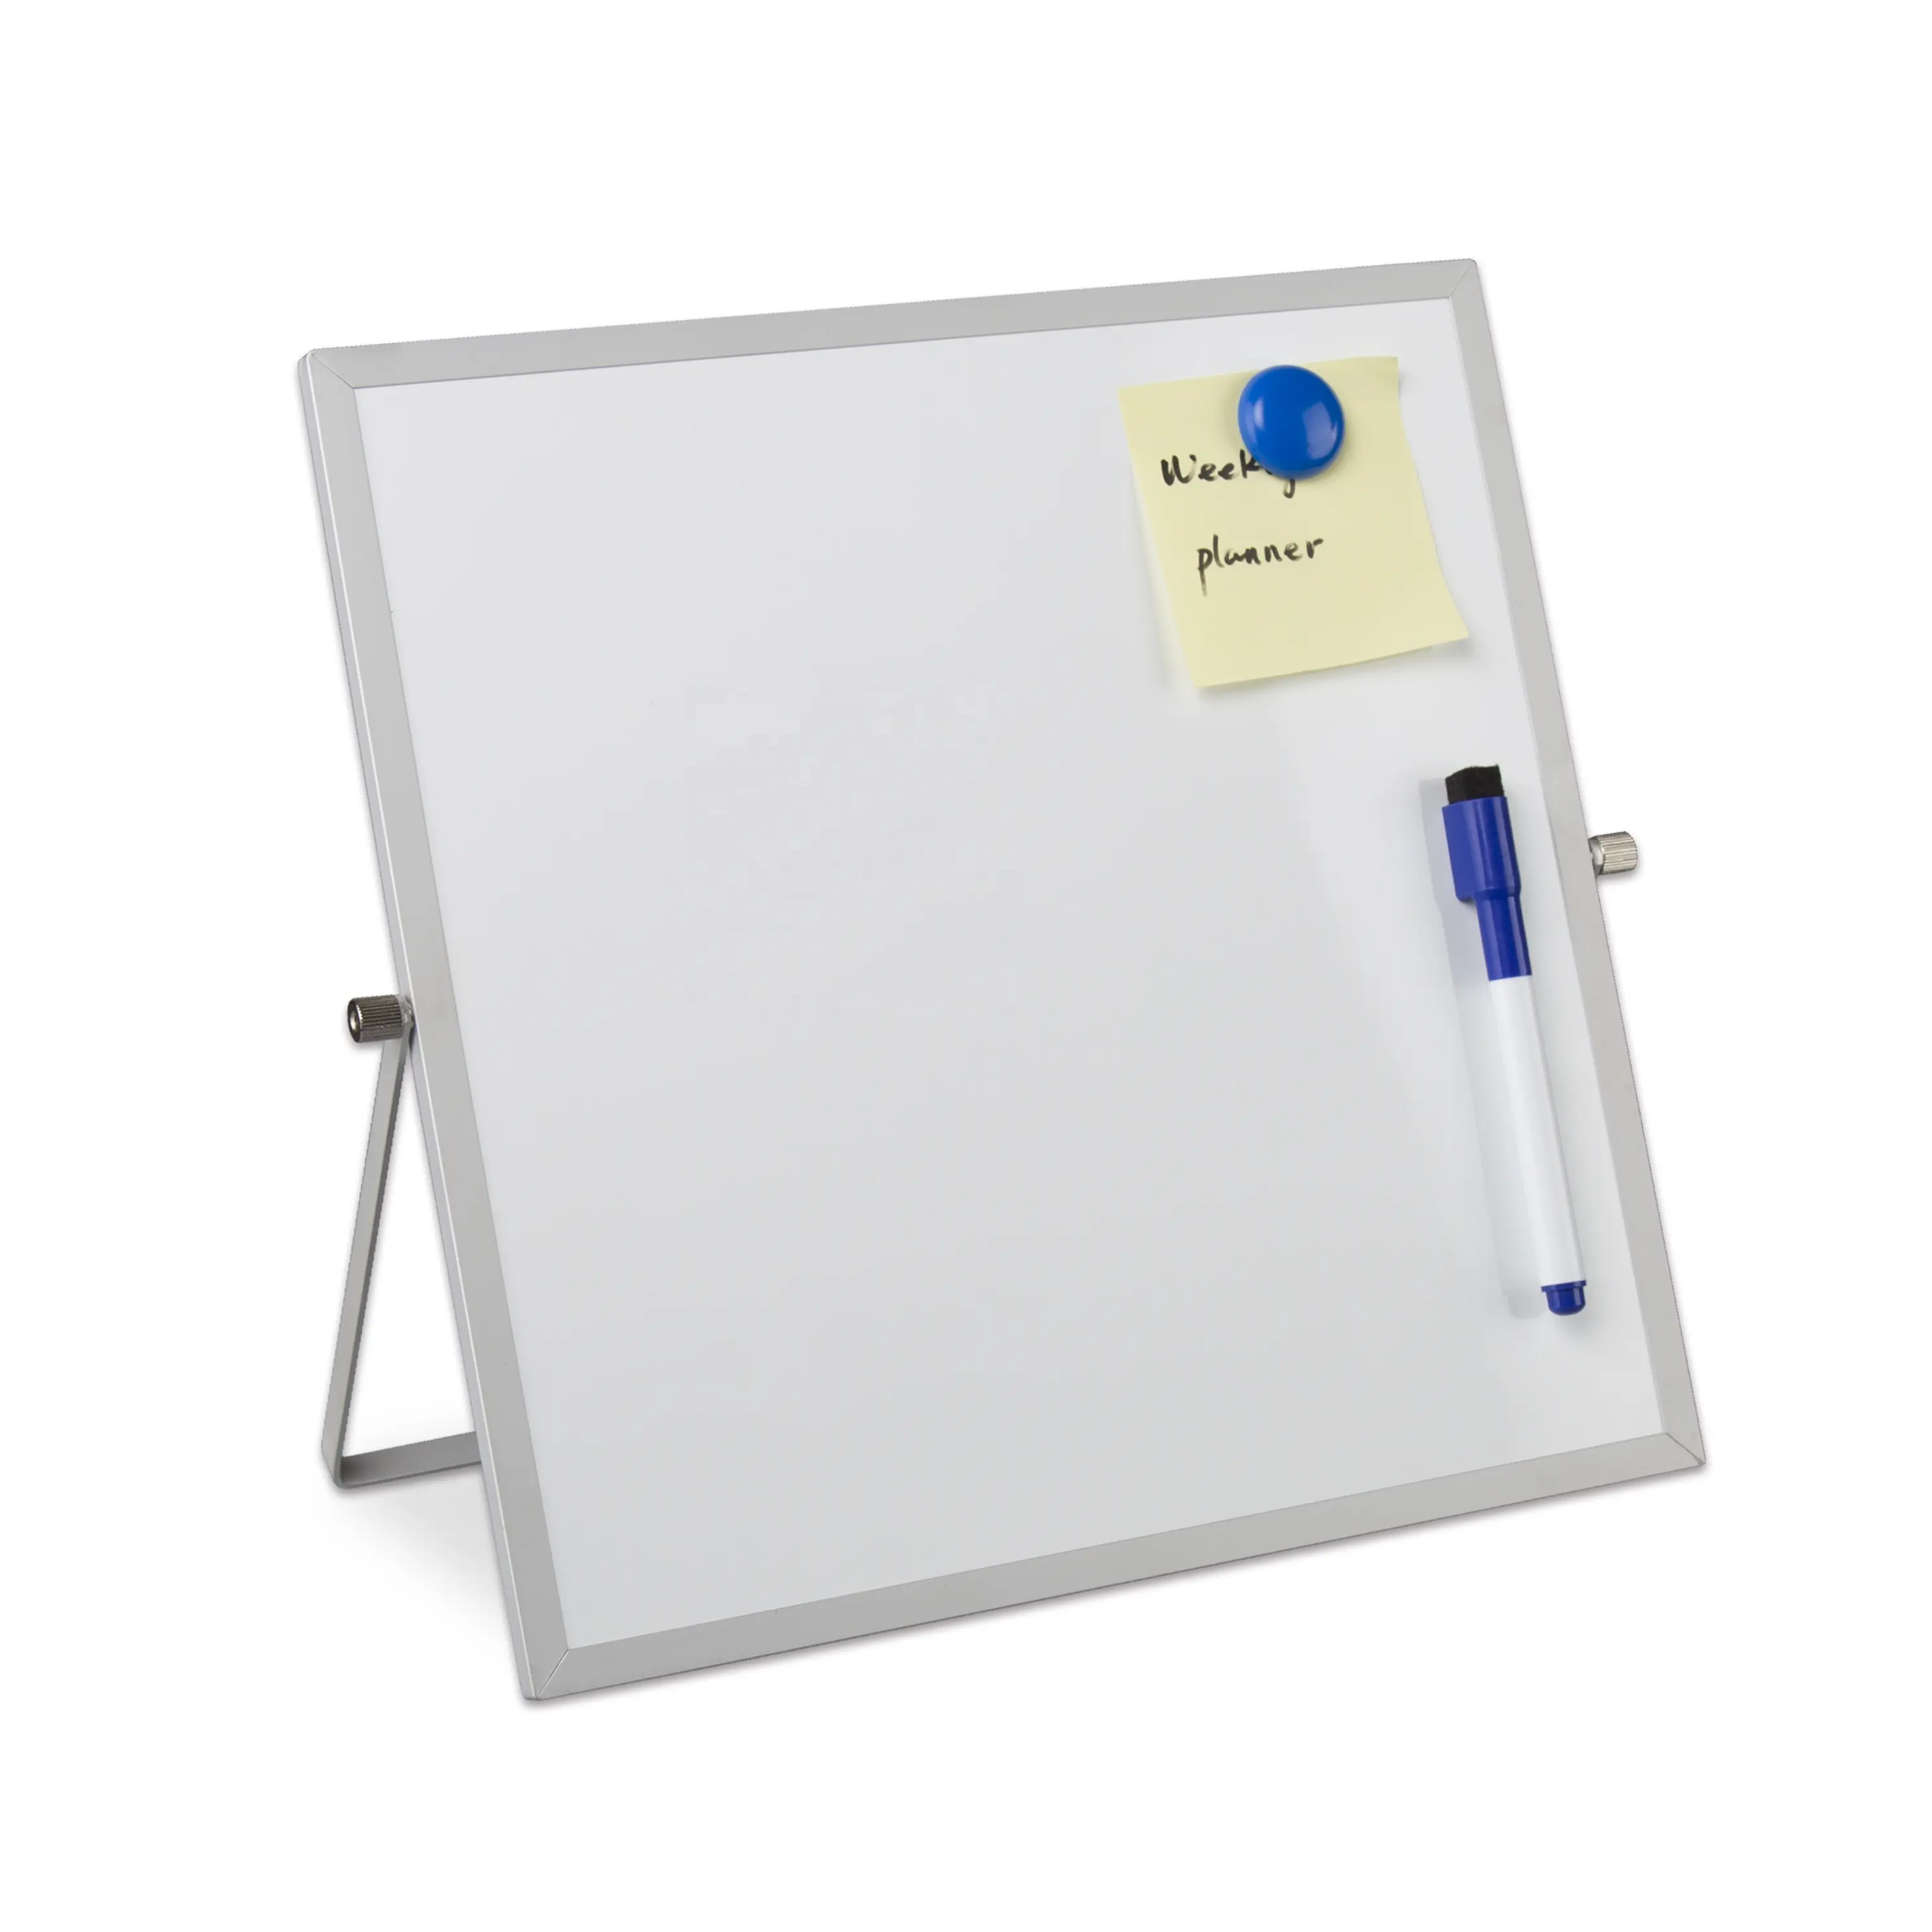 Reversible Double-sided Magnetic Board Dry Erase Board Standing Memo White Board for Office School